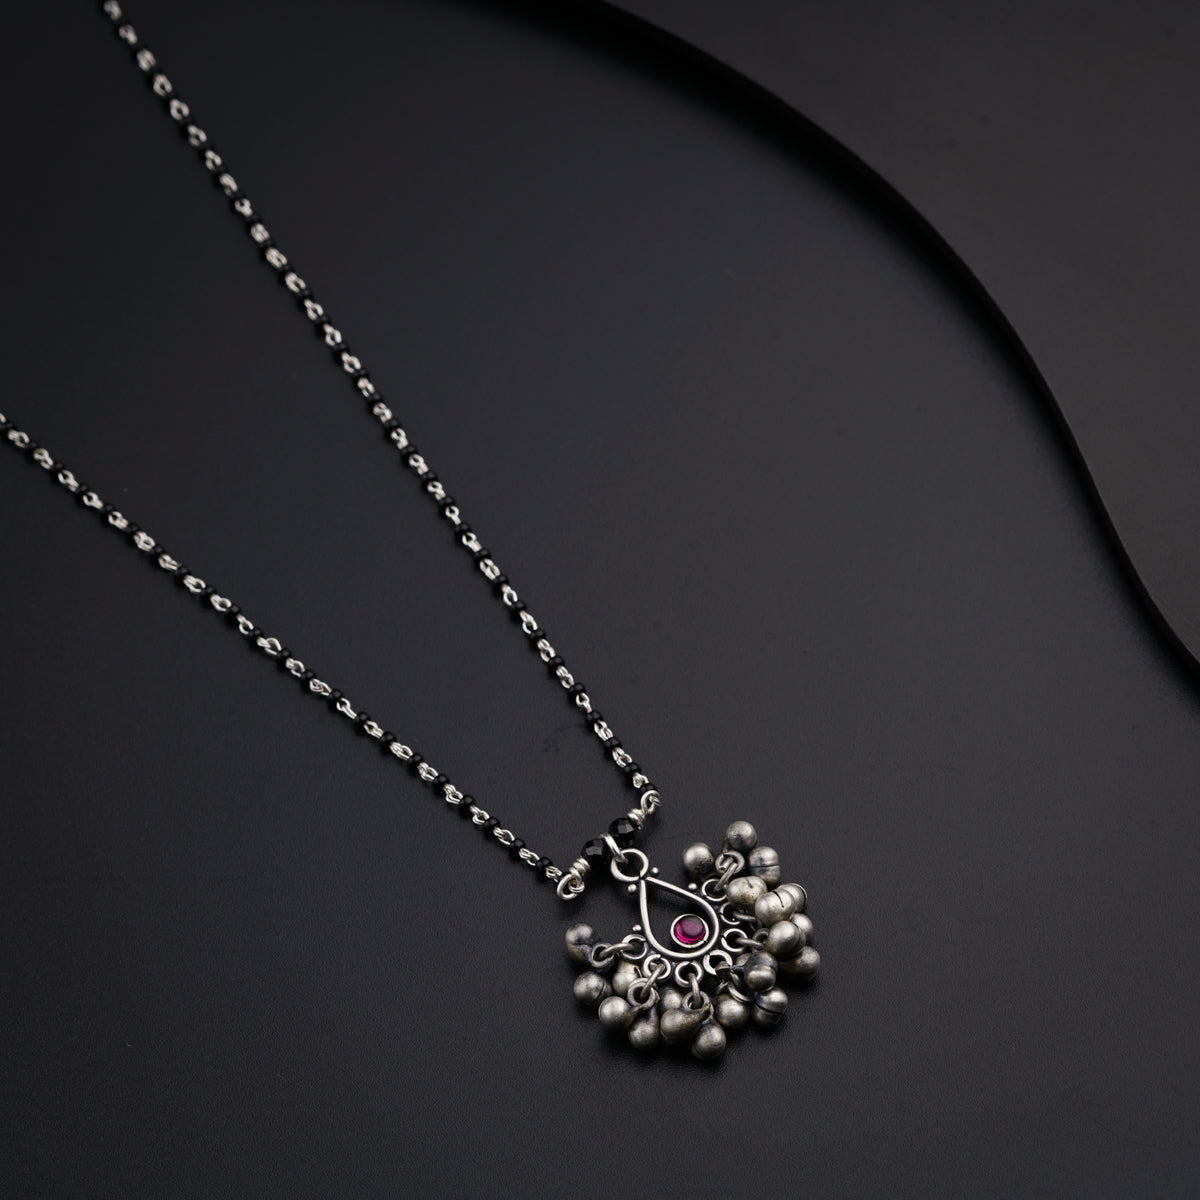 a necklace with a flower design on it